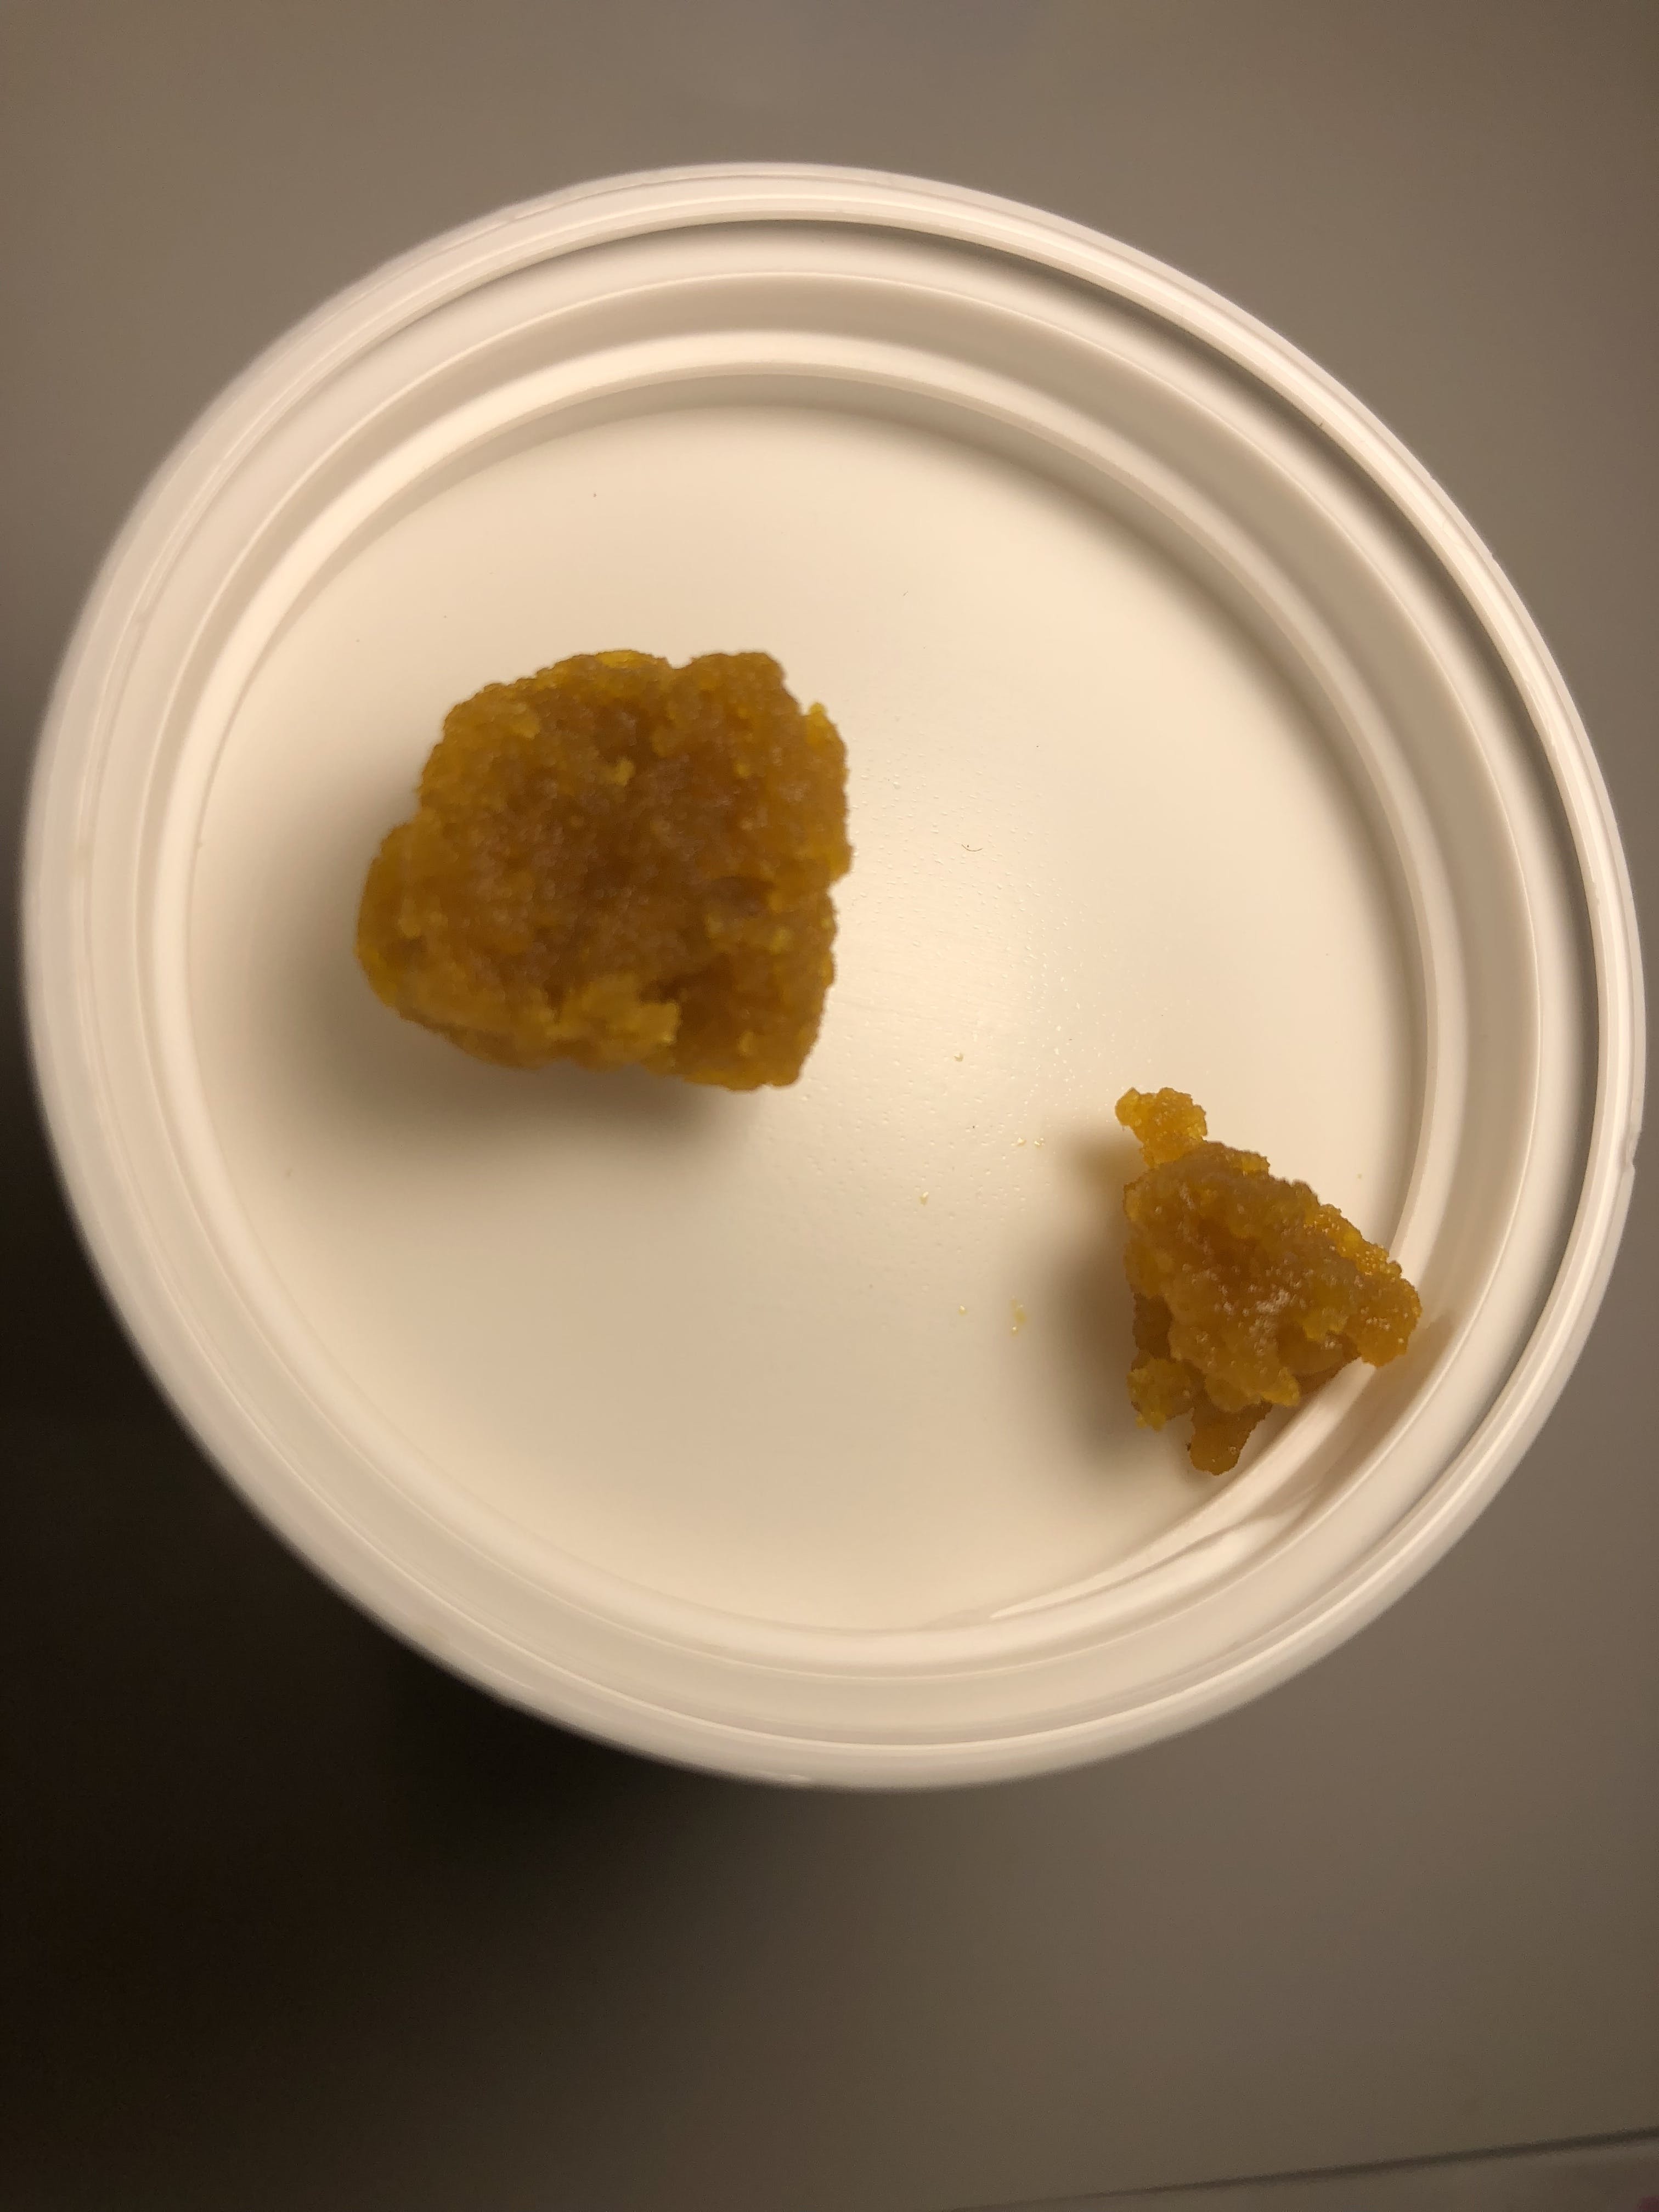 wax-loaded-sour-zkittles-crumble